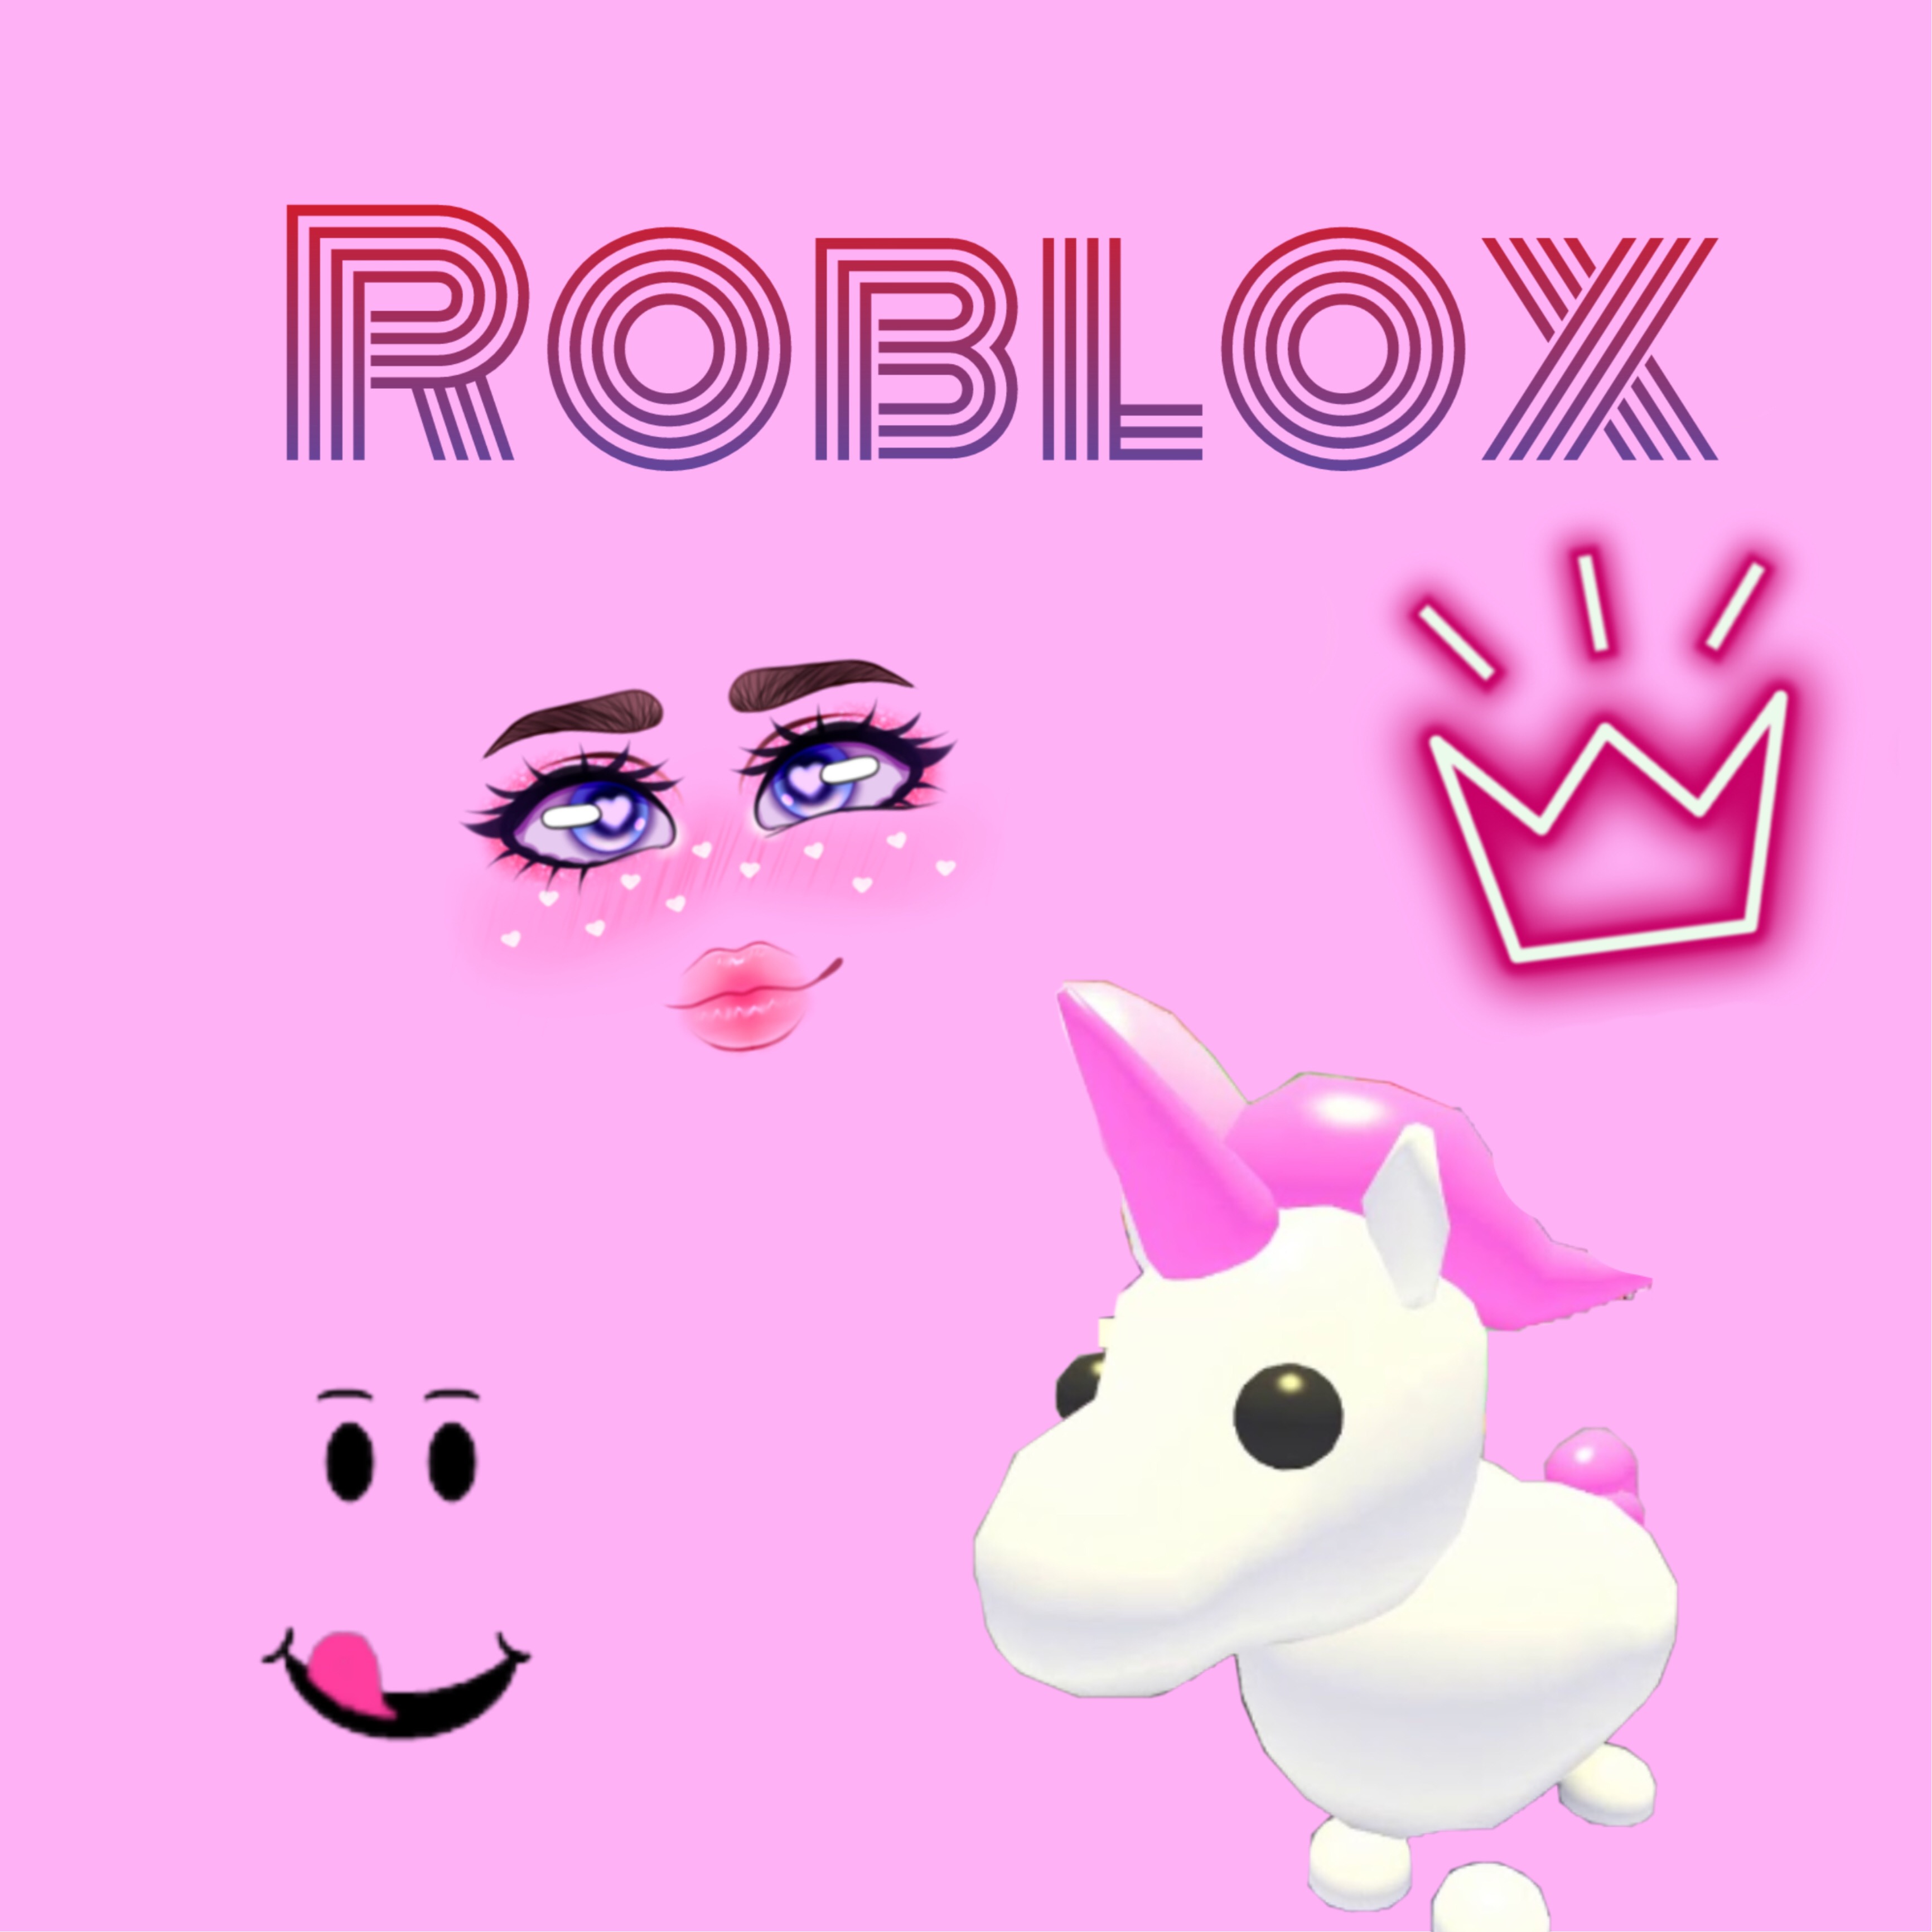 roblox wallpapers wallpaperedit Image by WALLPAPER